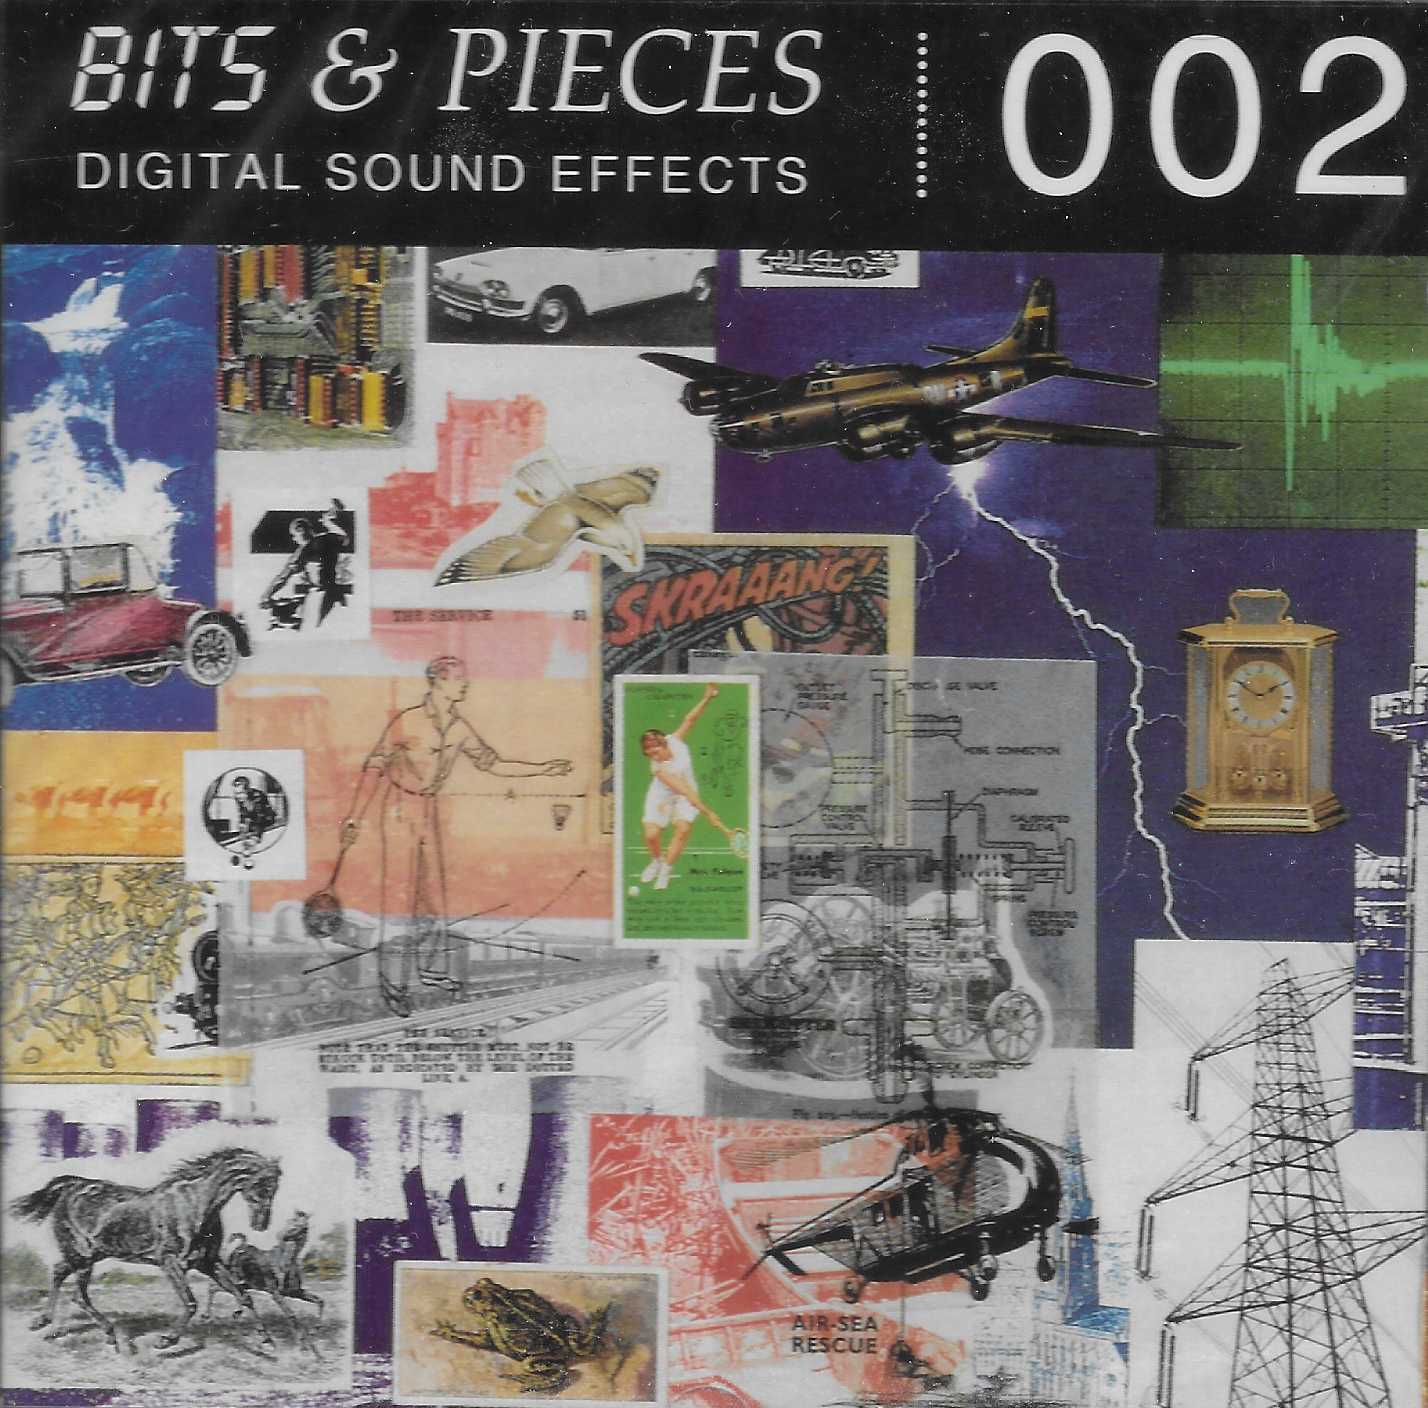 Picture of BITS 002 Bits & pieces digital sound effects 002 by artist Various from ITV, Channel 4 and Channel 5 cds library